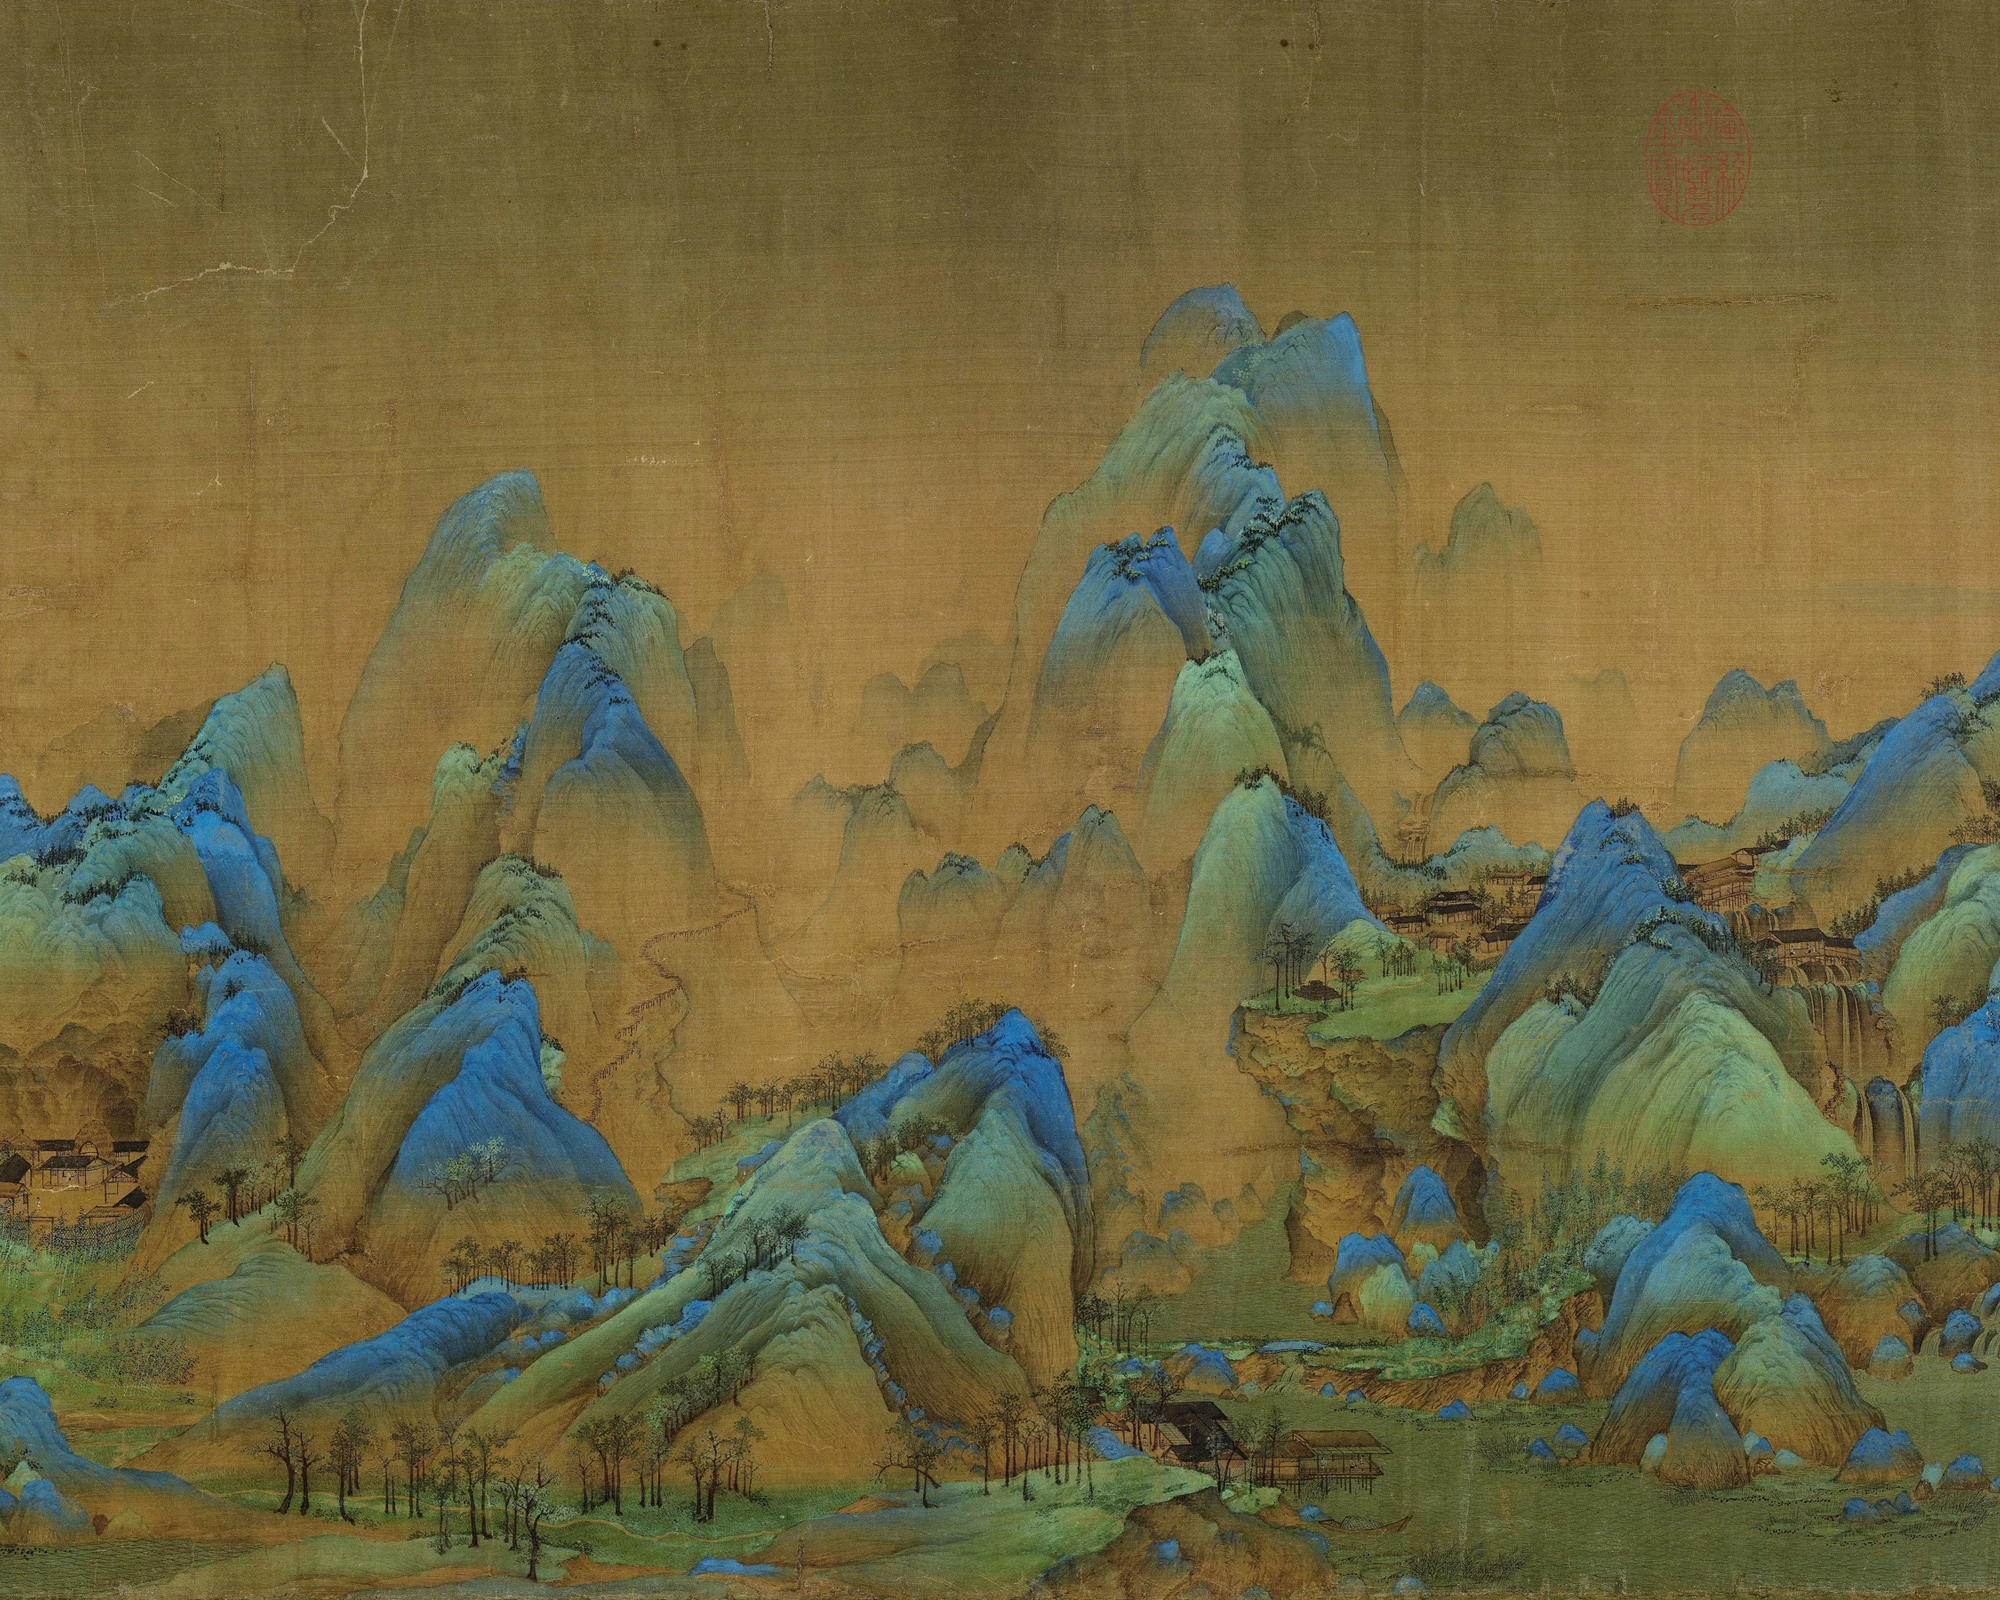 Song Dynasty, Middle Ages